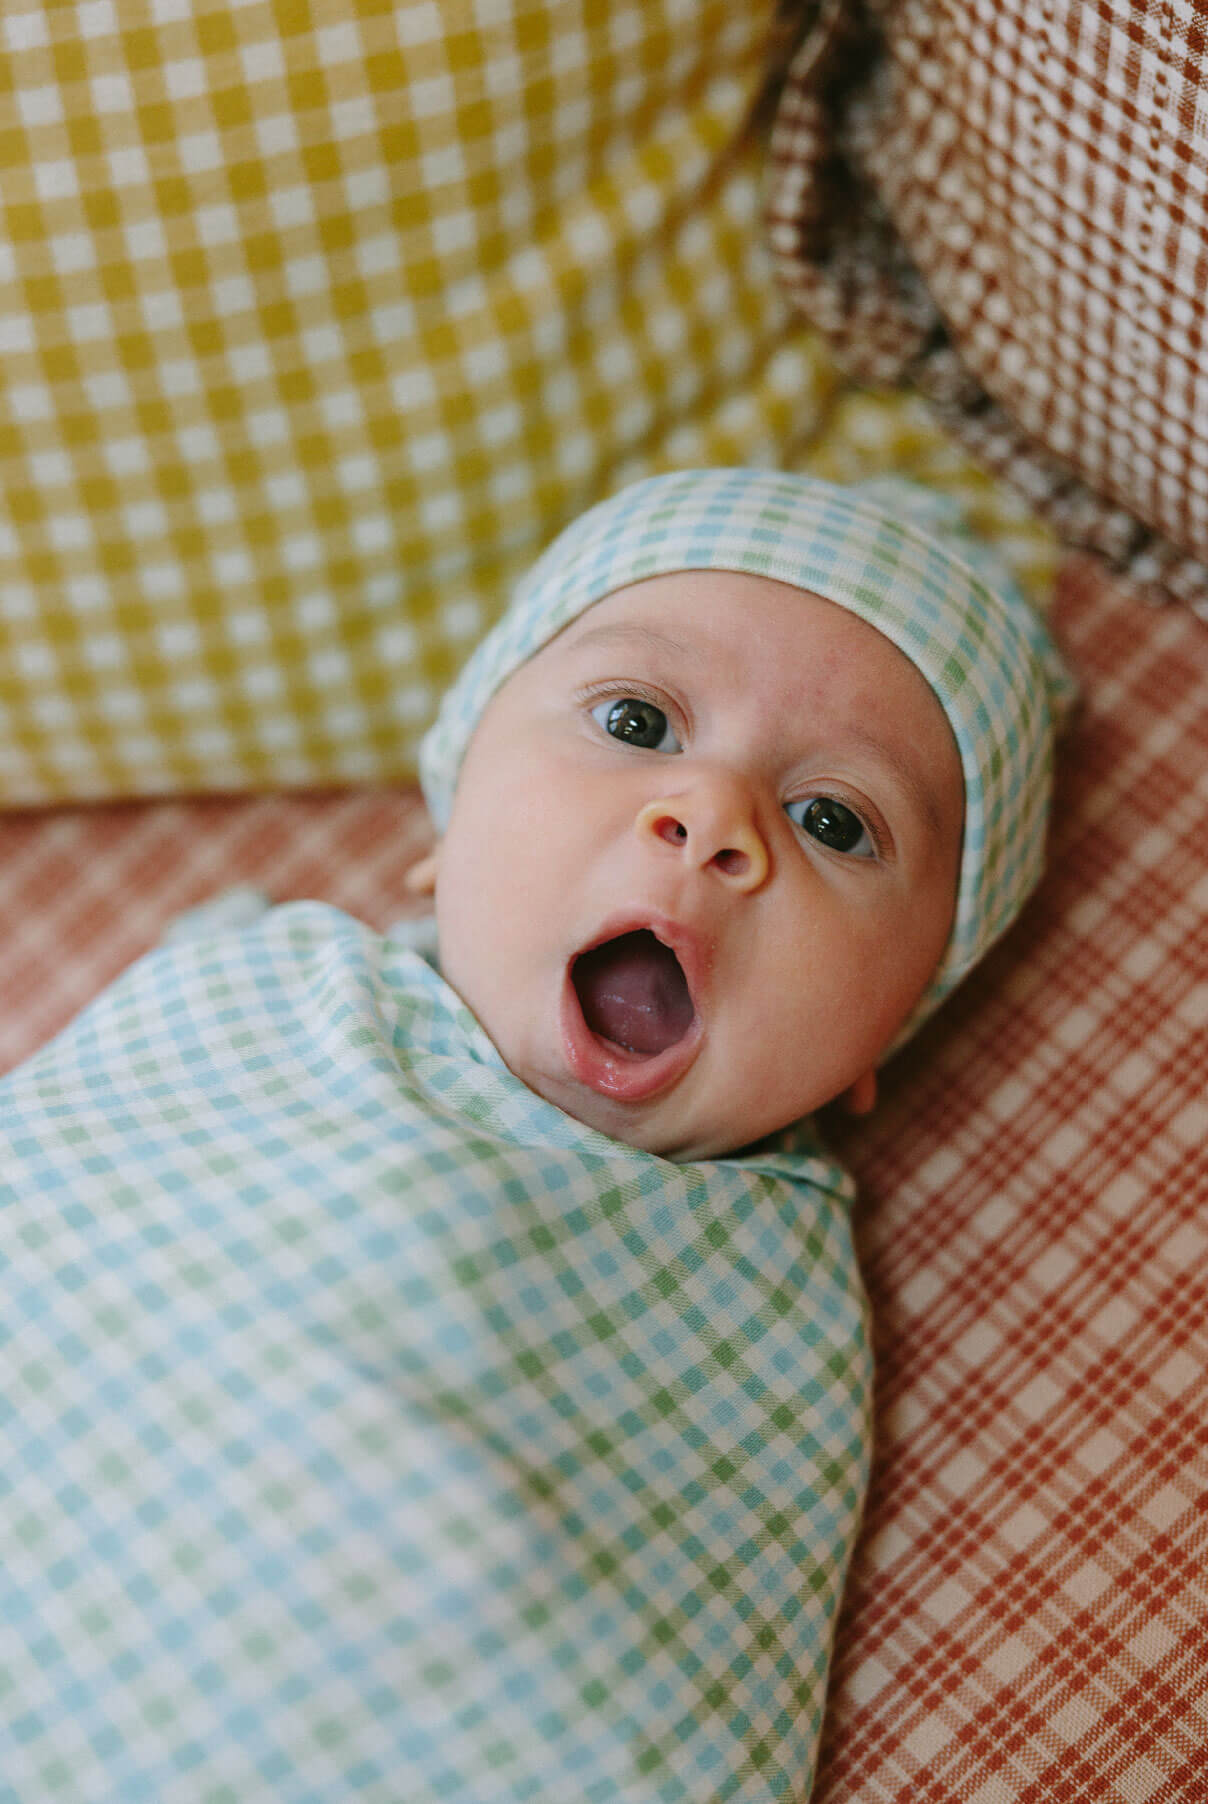 Baby swaddled in a "picnic" patterned Solly swaddle yawns